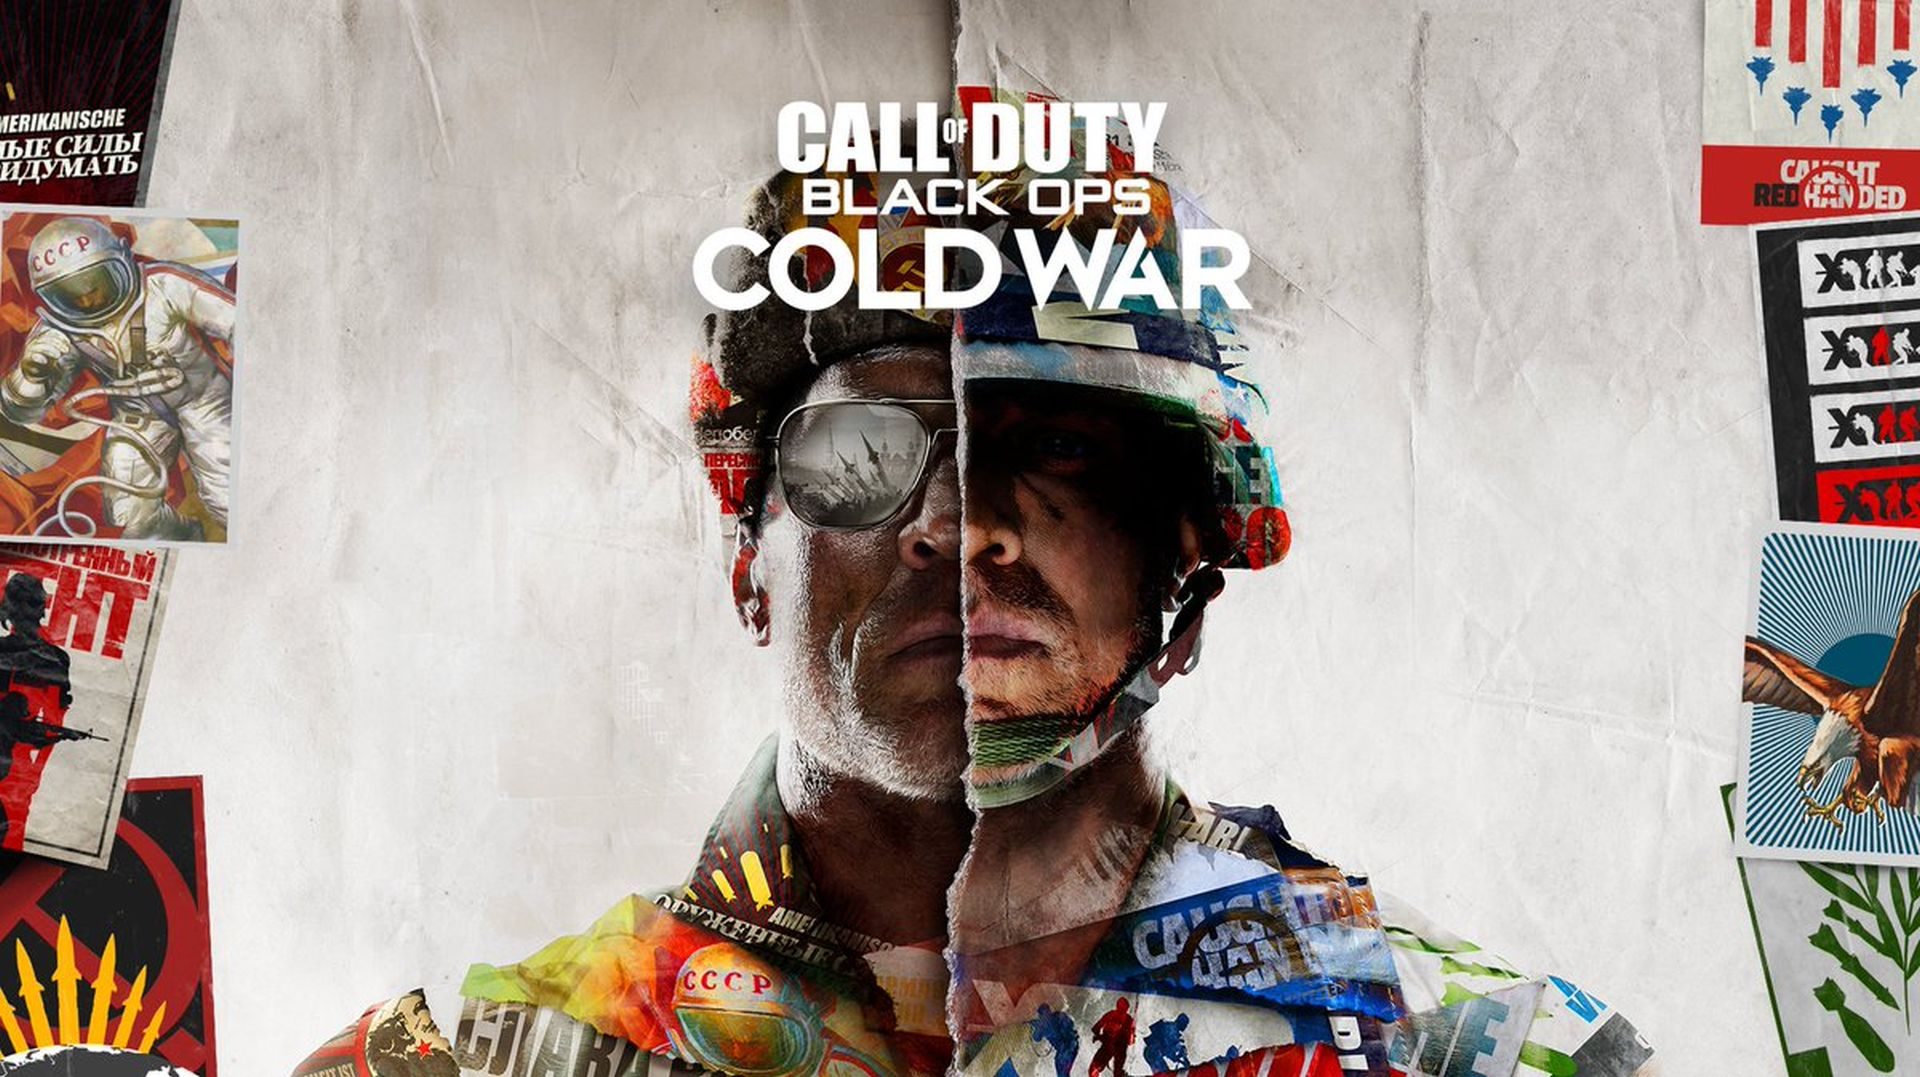 call-of-duty-black-ops-cold-war_01-6402563